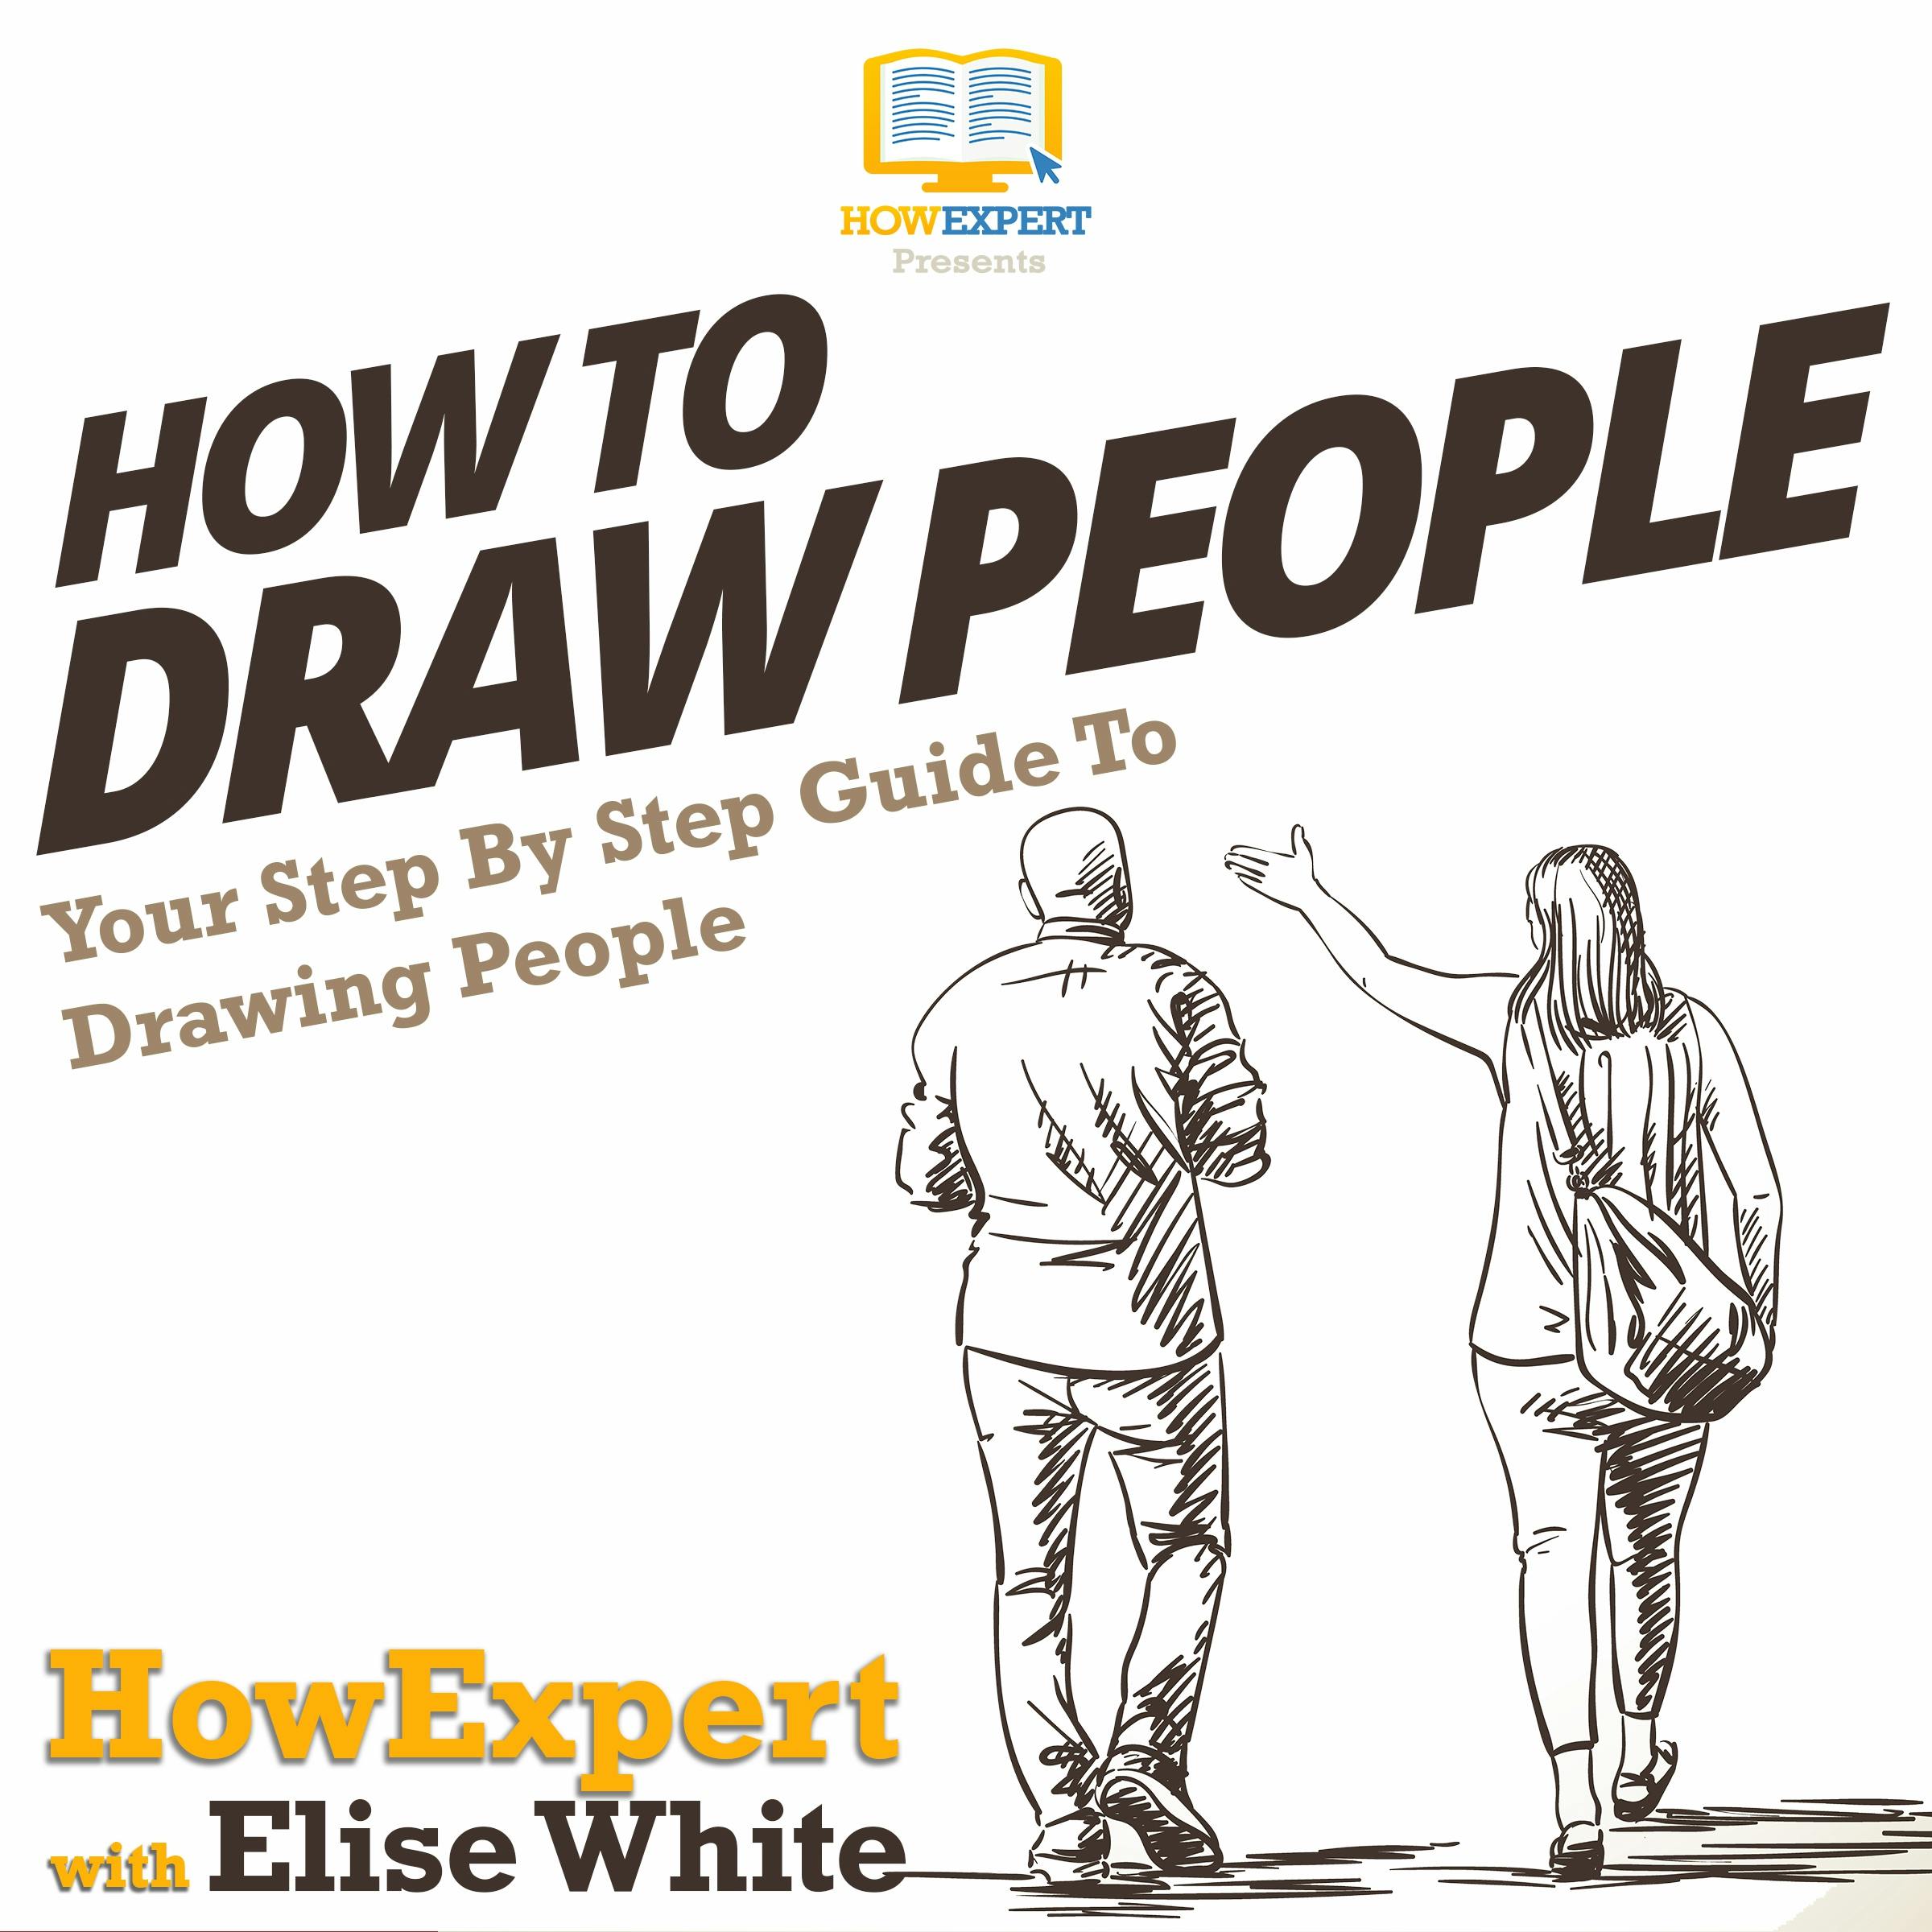 How To Draw People: Your Step By Step Guide To Drawing People - Elise White, HowExpert